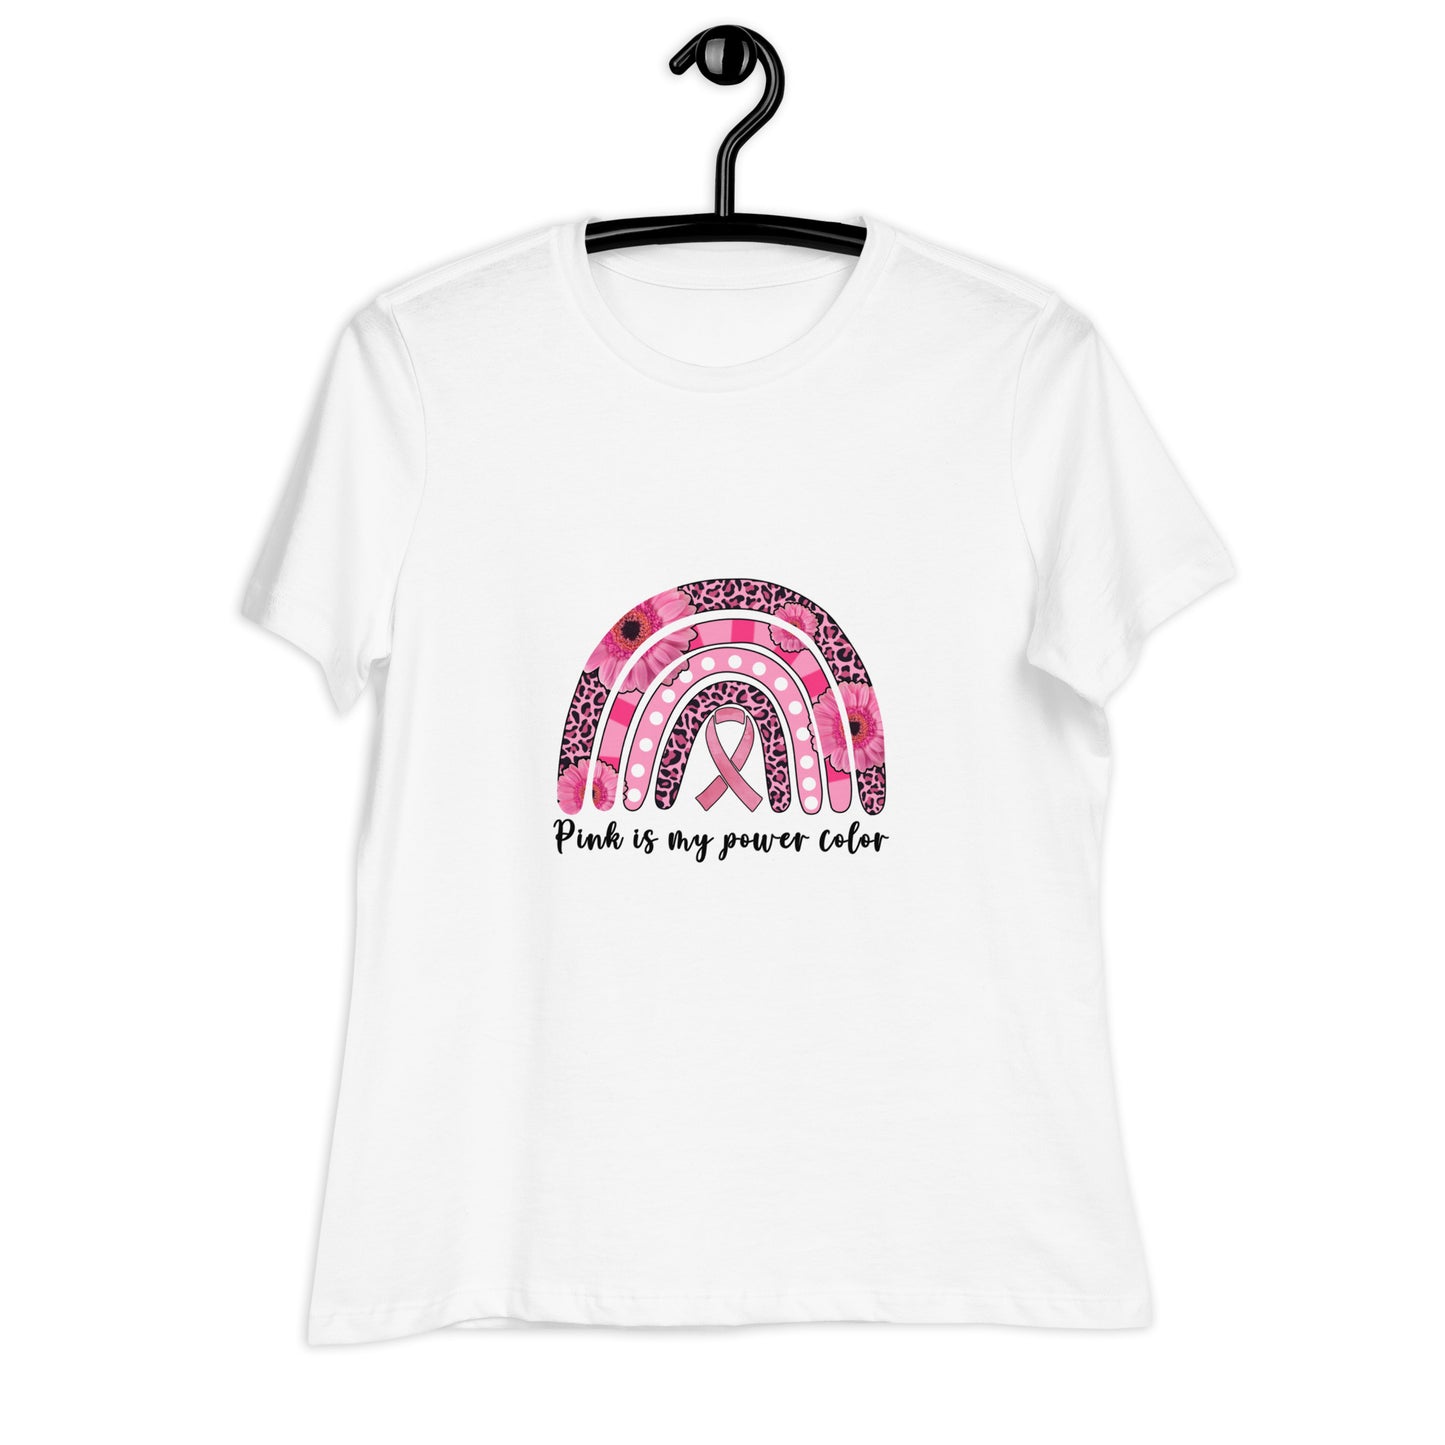 Women's Relaxed T-Shirt-Pink-Is-My-Favorite-Color